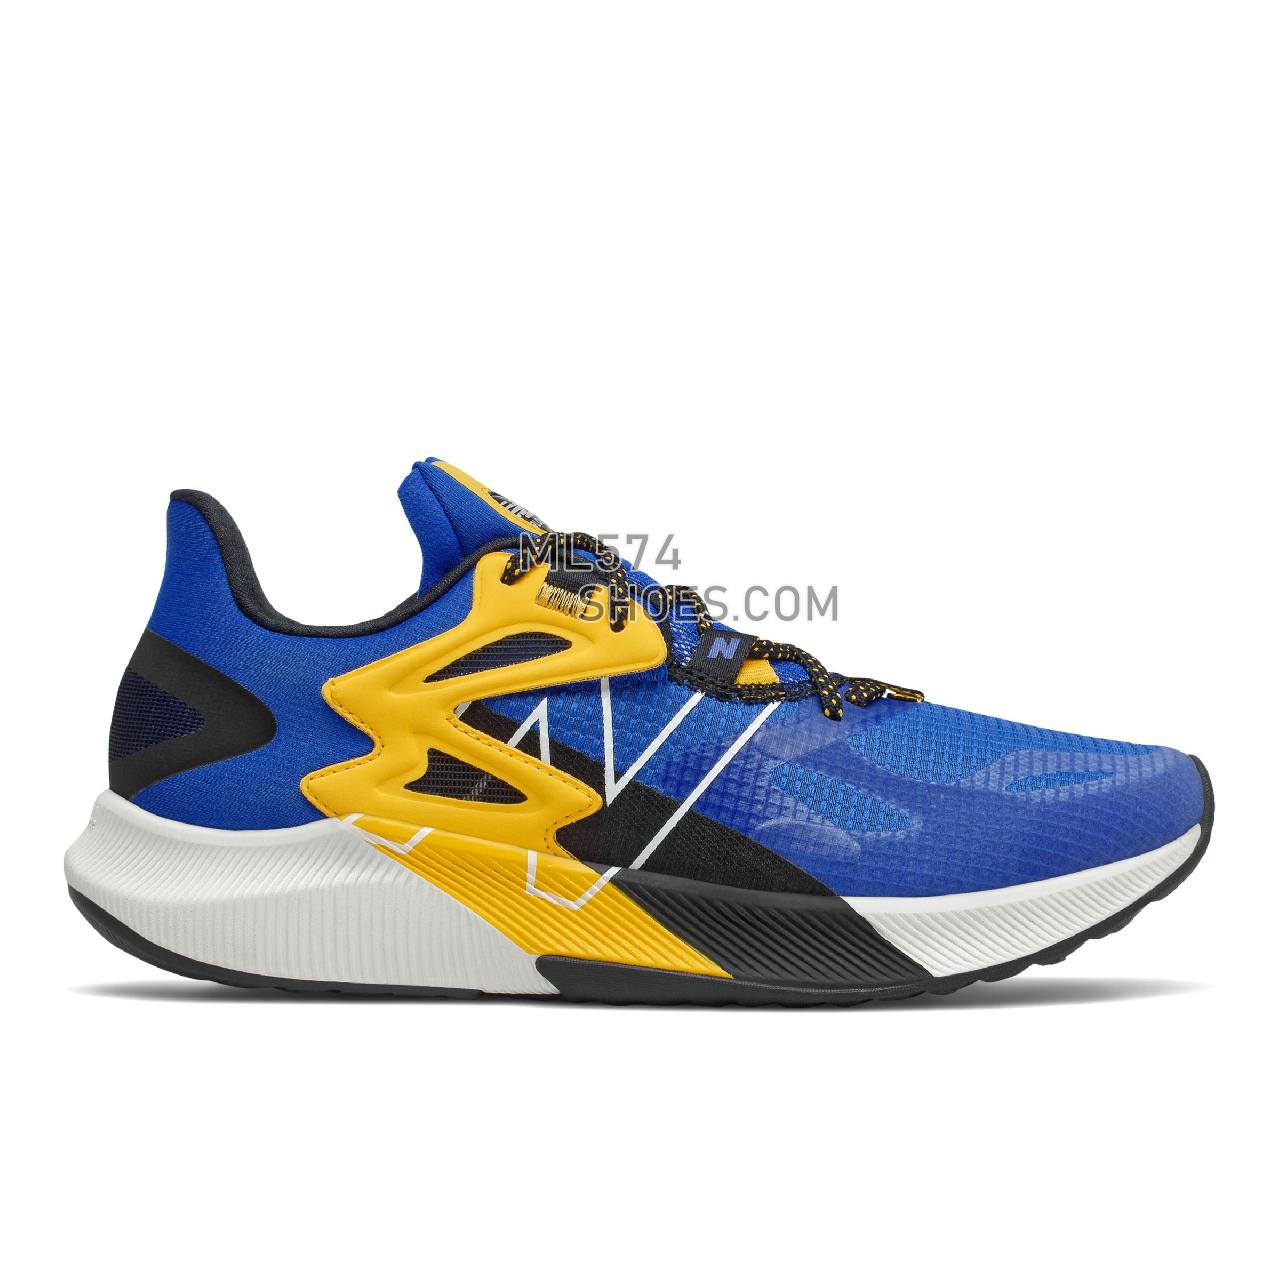 New Balance FuelCell Propel RMX - Men's Fuelcell Sleek And LightWeight - Cobalt with Team Gold and Black - MPRMXCC